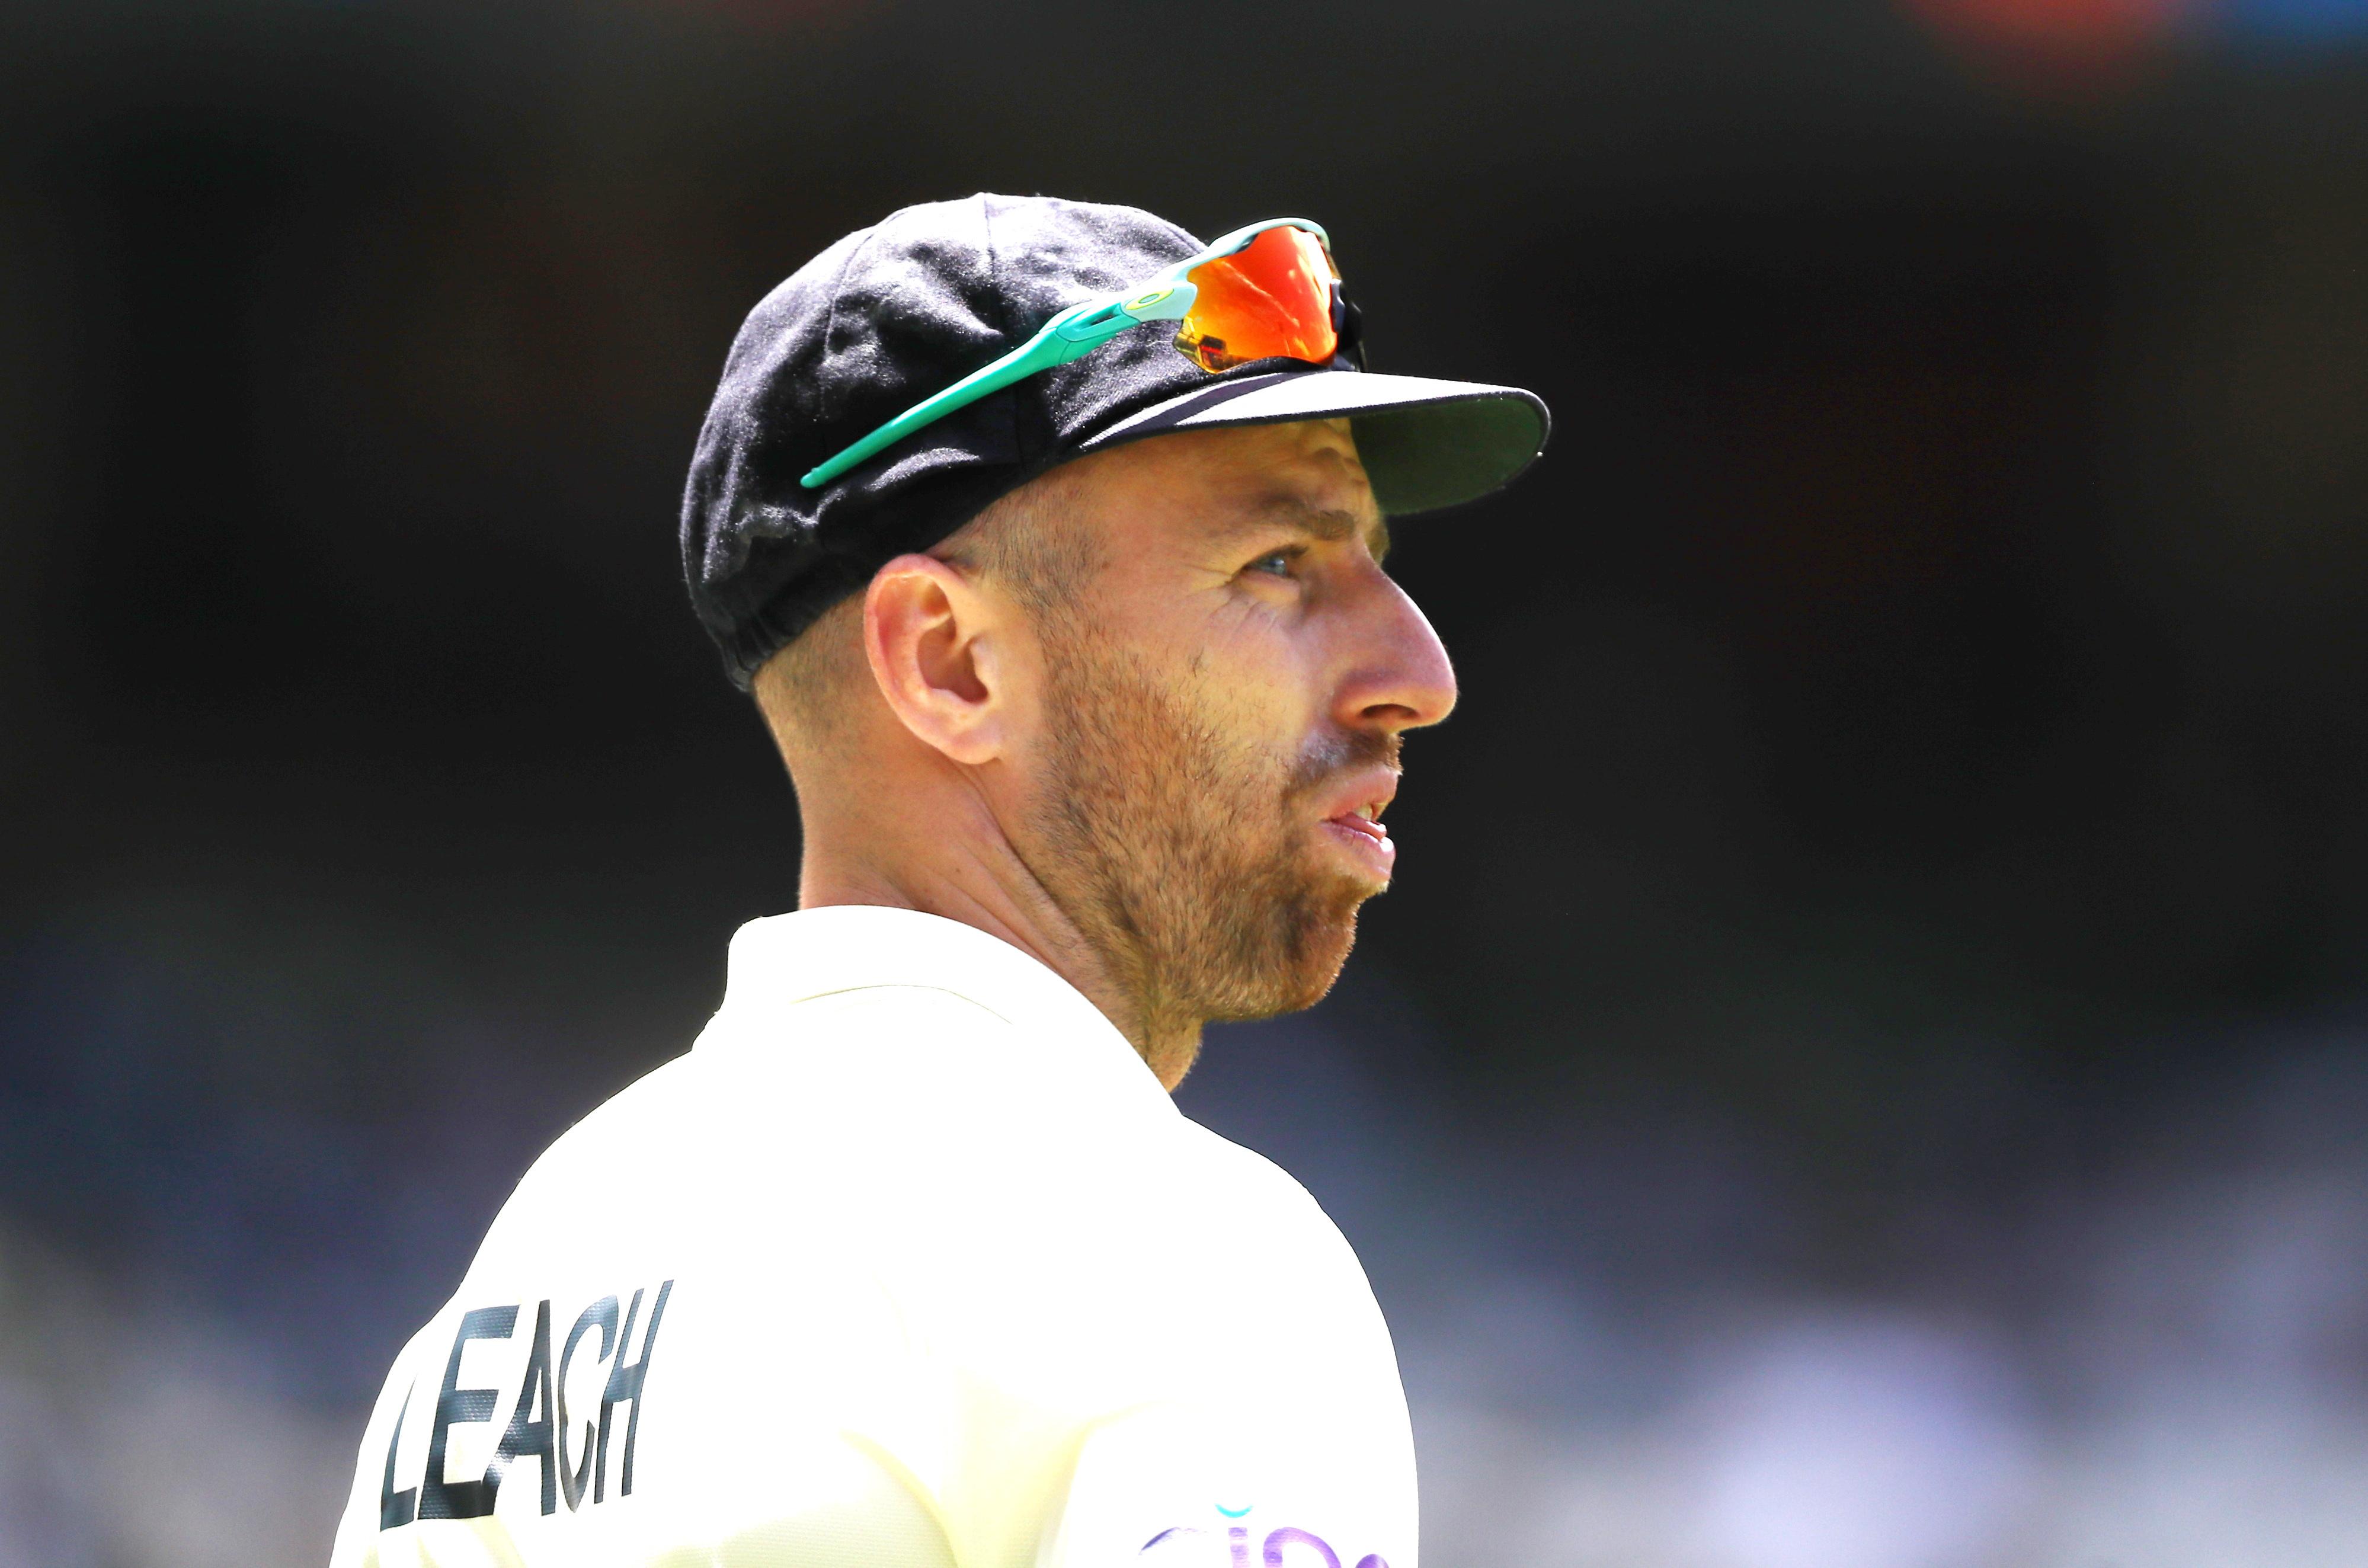 Jack Leach has been ruled out of the Ashes series by a back injury